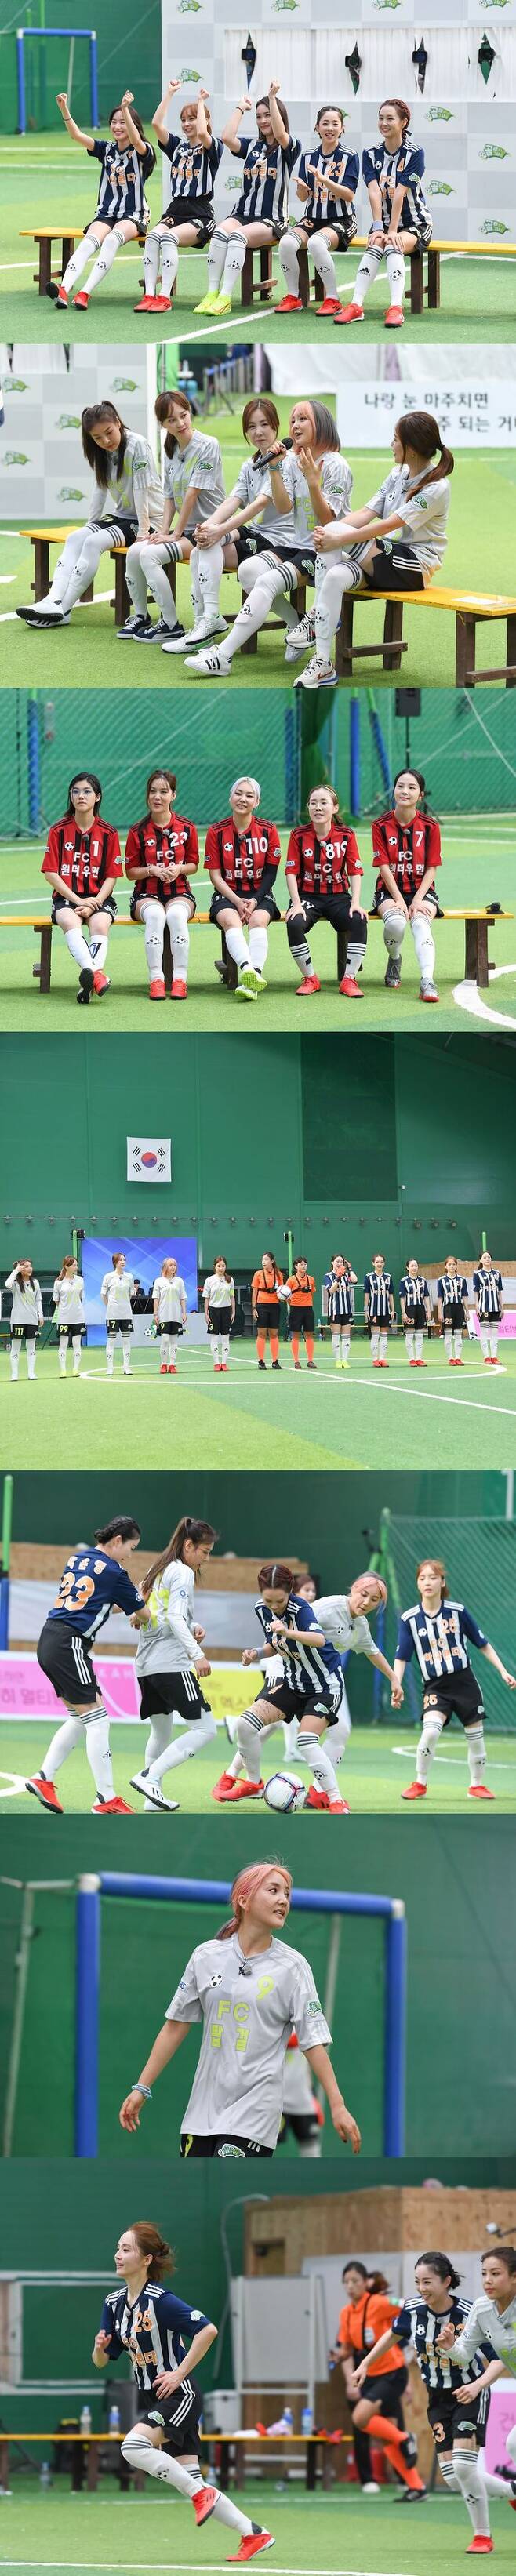 The members of FC Anaconda, one of the three new teams of Golden Girl, were revealed.On the 27th, SBS Goal Beating Women will be broadcast on the 27th, and the production team will join the FC Anaconda team with Park Eun-young, Shin Ah-yeong, Yun Tae-Jin and Joo Si-eun announcers including Entertainment Representative Anatainer Oh Jin-yeon.On the 27th, Golden Woman broadcast on the 27th following FC Top Girl and FC Wonder Woman, which brought a big topic to the public last week, the first debut and the face of the new team FC Anaconda .FC Anaconda members are known to have a strong physical strength as well as a soccer theory accumulated through sports relay experience, and attention is focused on becoming a powerful team to compete against the existing six teams.In the first game, FC Anaconda showed a strong defensive barrier between Yun Tae-Jin and Joo Si-eun, and Park Eun-young and Shin Ah-yeongs powerful fang shot hit the goal several times and showed their hidden ability.As the soccer skills of FC Anaconda announcers are revealed, expectations for the new league of Golden Woman season 2 are also growing.The first debut between the new teams is FC Anaconda and FC Top Girl, which is a combination of girl group members.FC Top Girl against FC Anaconda also showed aggressive play with charismatic captain Chae Rina and Energizer sea.In addition, goalkeeper Ayumis brilliant save was successful in reversing the atmosphere and continued to play a tight game between the two teams.The main character of the first victory title of the debut to announce the start of season 2 is wondering whether it will be FC Anaconda or FC Top Girl.The Goal Girl, where the confrontation between the new teams will be held, will be broadcast at 9 pm on the 27th.